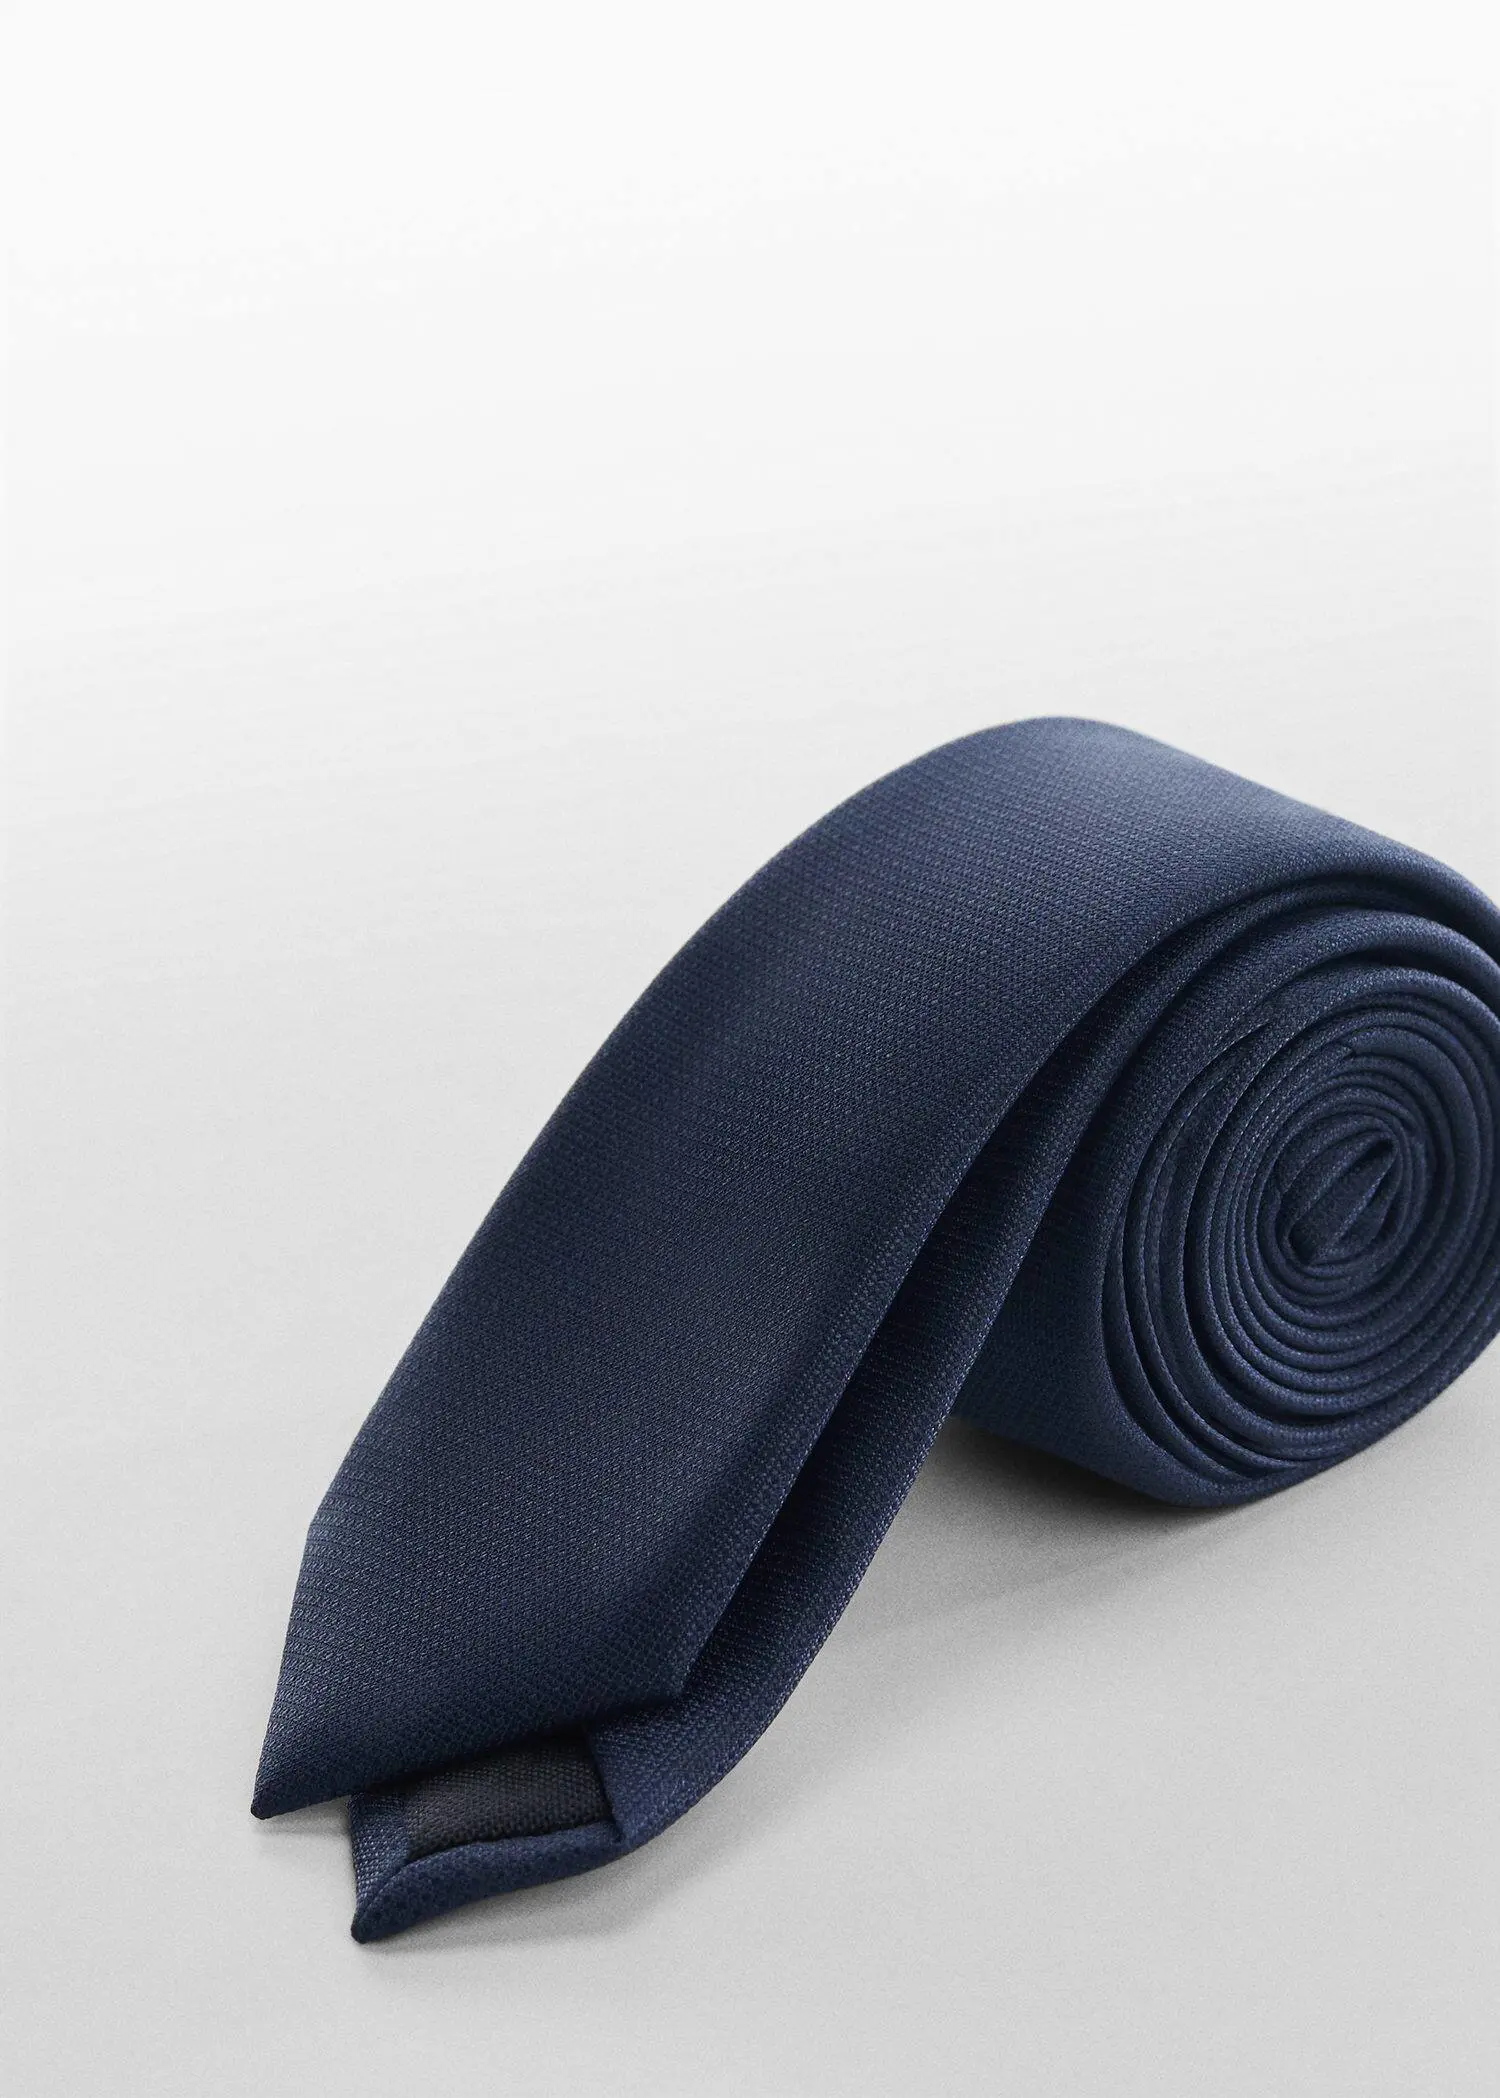 Mango Narrow structured tie. a close-up of a blue neck tie on a white surface. 